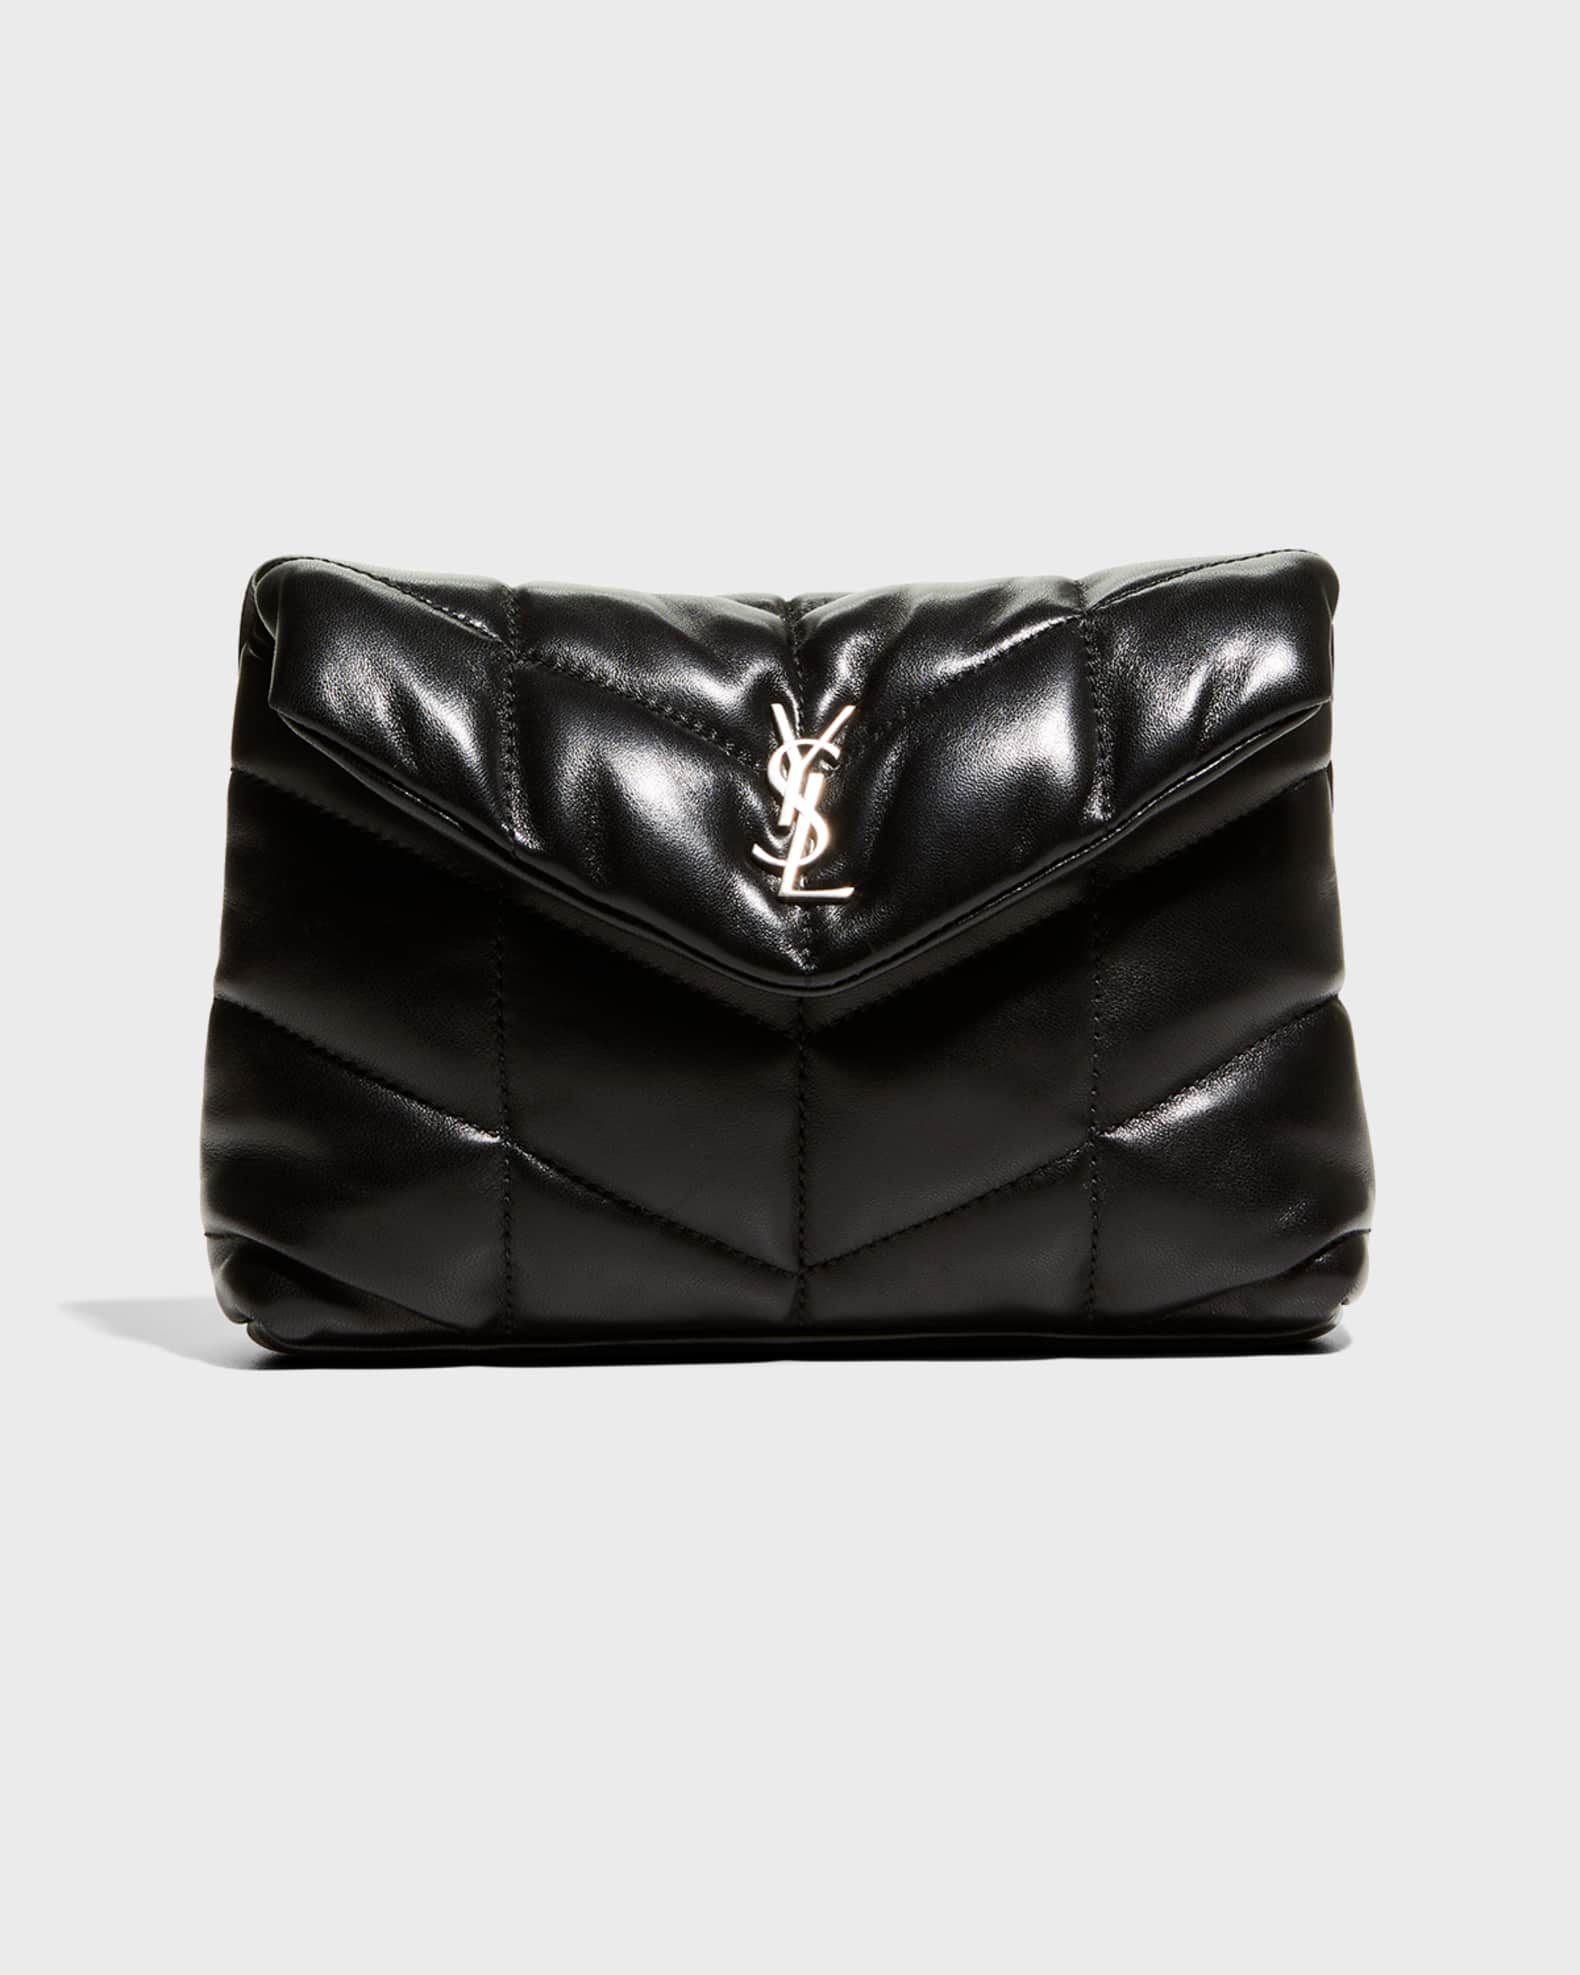 Saint Laurent Loulou YSL Quilted Puffer Pouch Clutch Bag